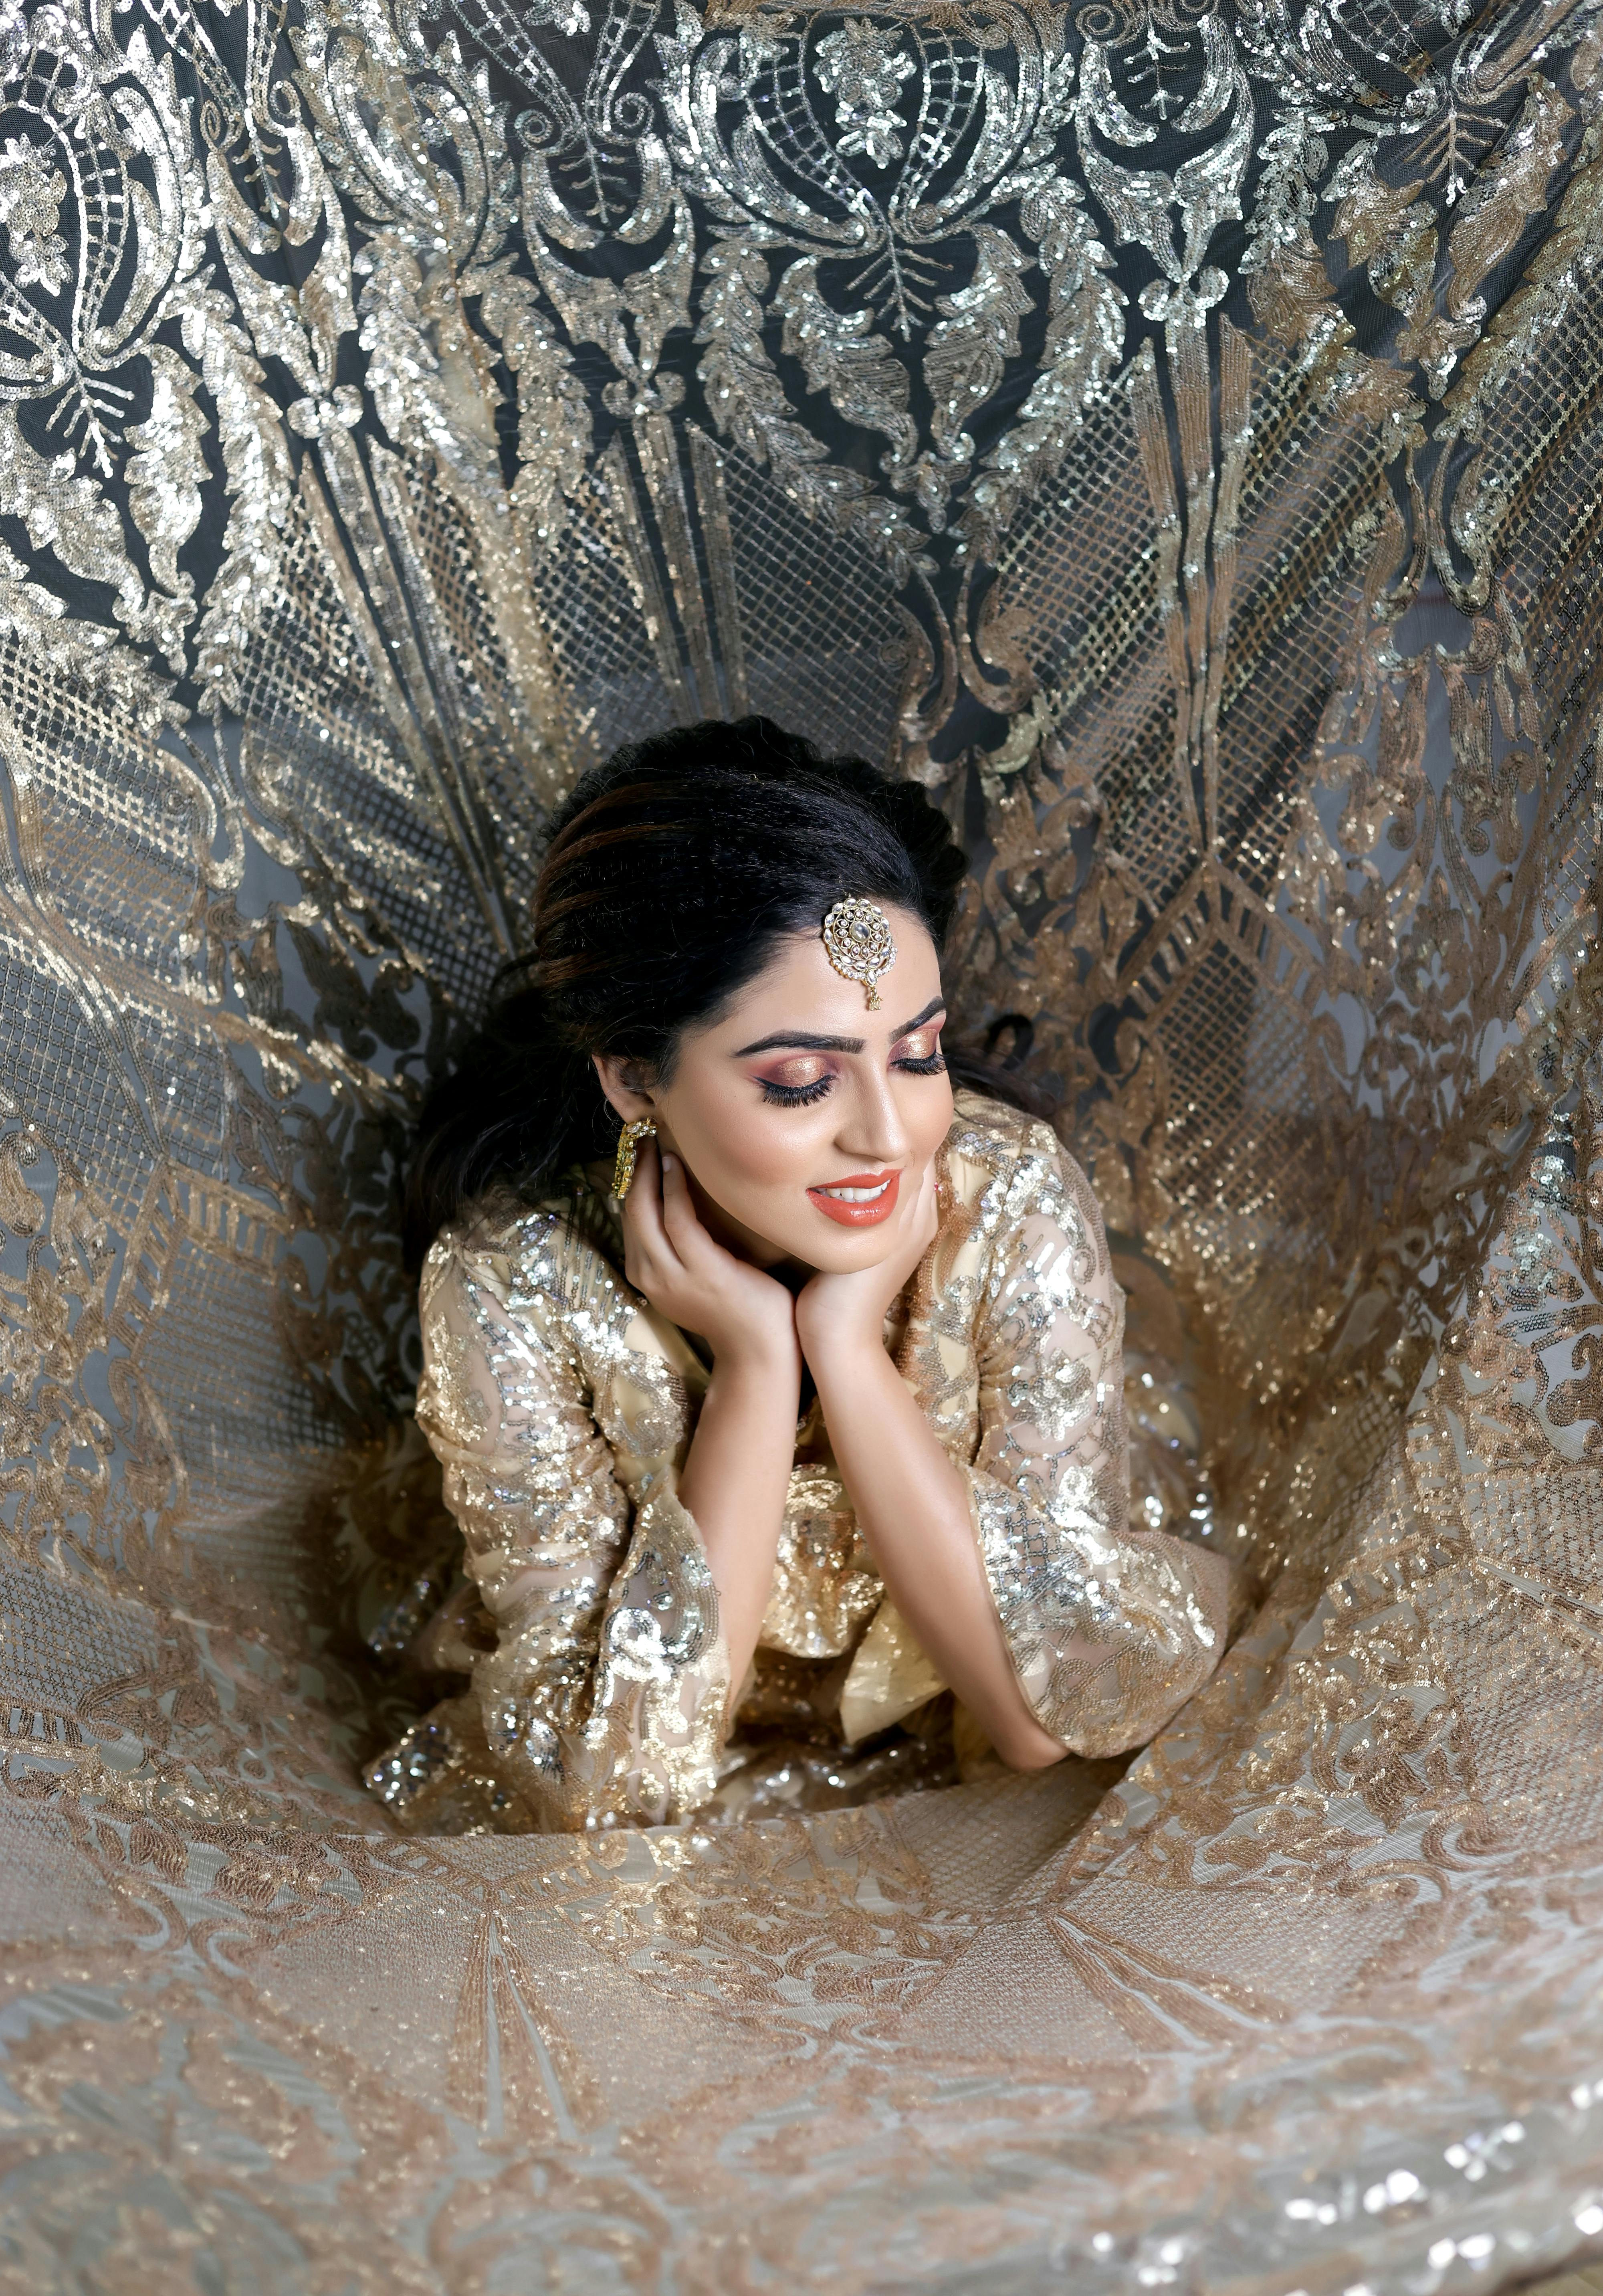 Here Are Some Dazzling Indian Bridal Photoshoot Poses for Every Bride's  Wedding Album!